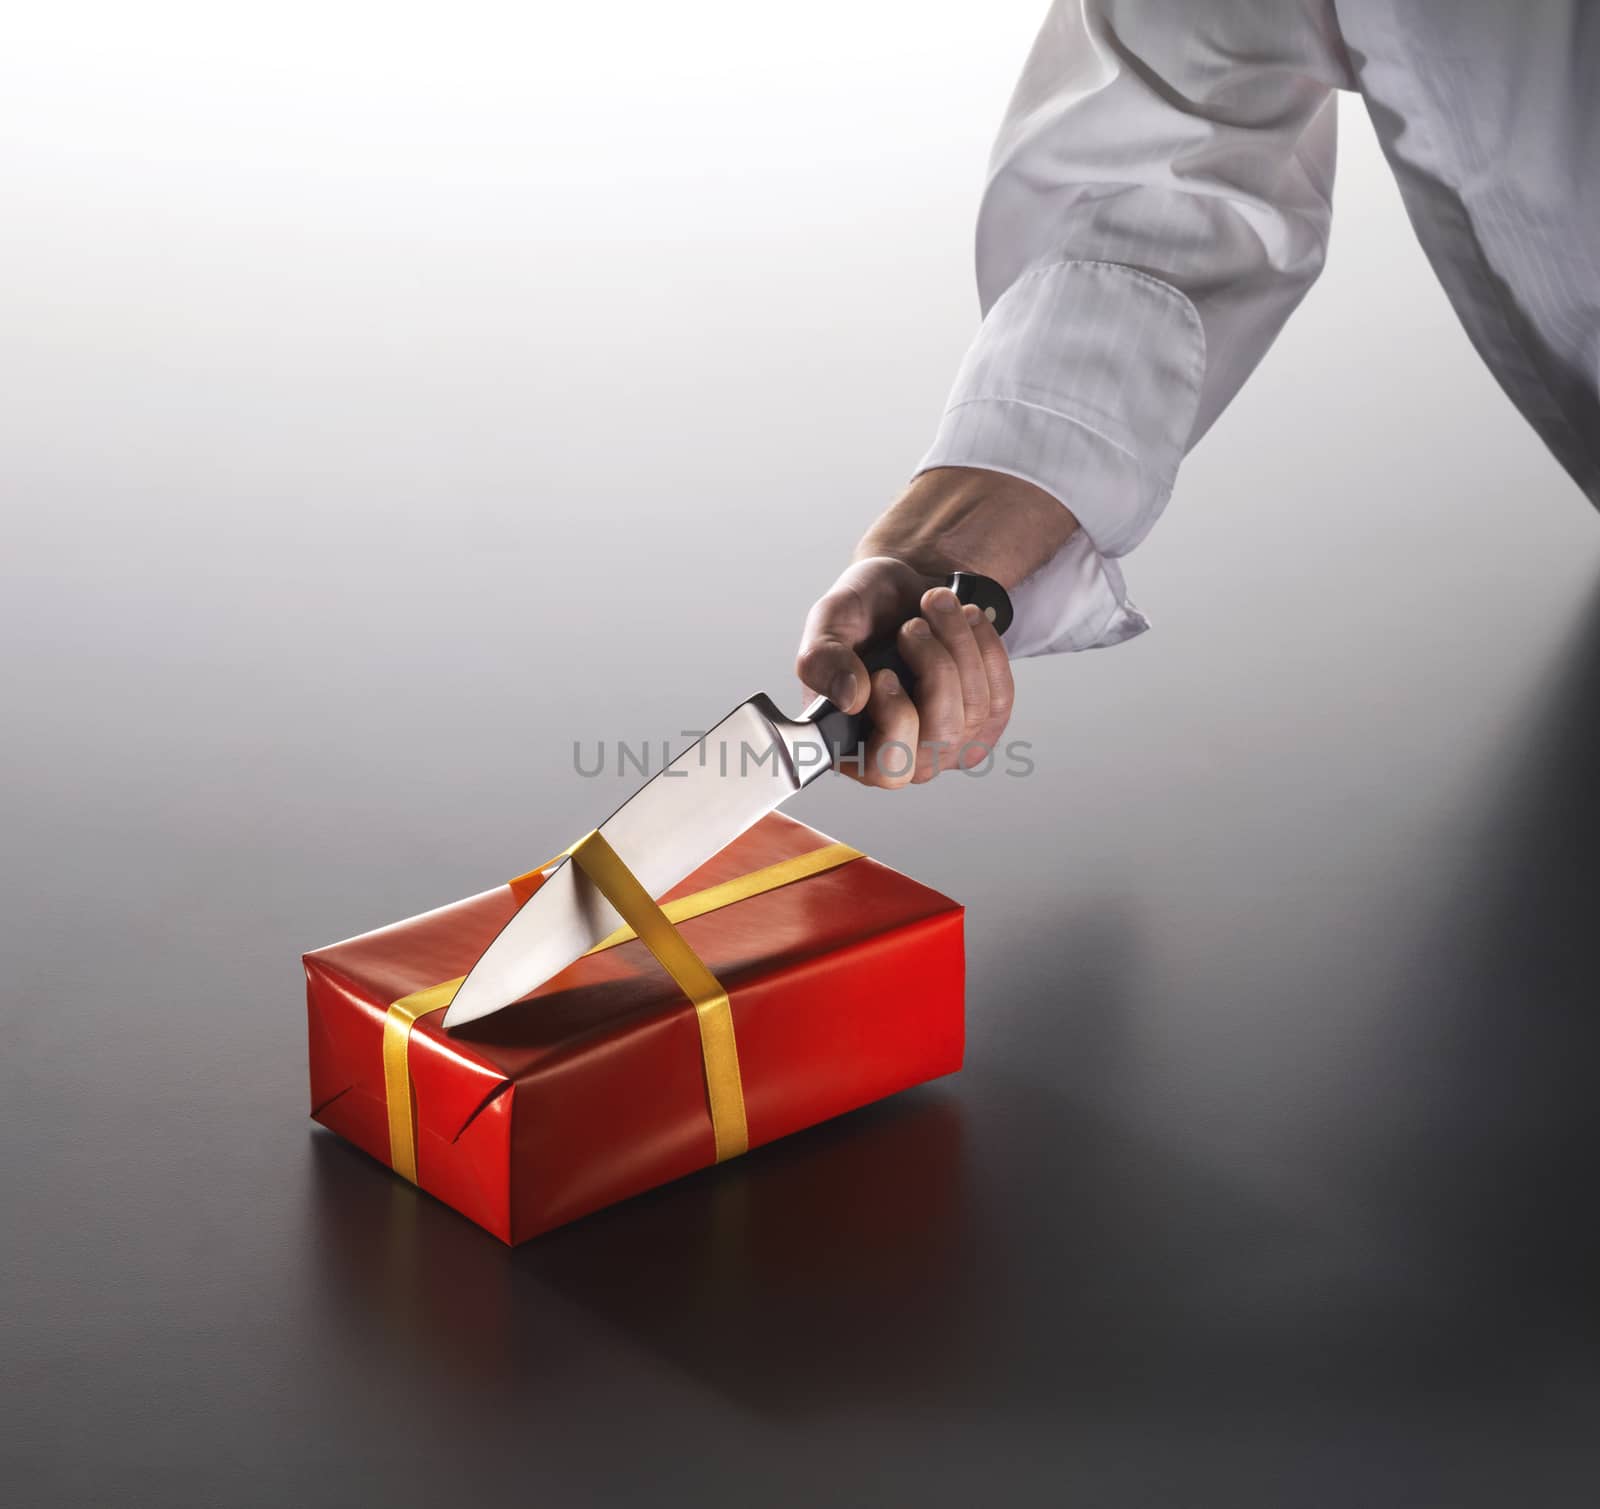 A man opens a birthday or Christmas present with a knife. by janssenkruseproductions